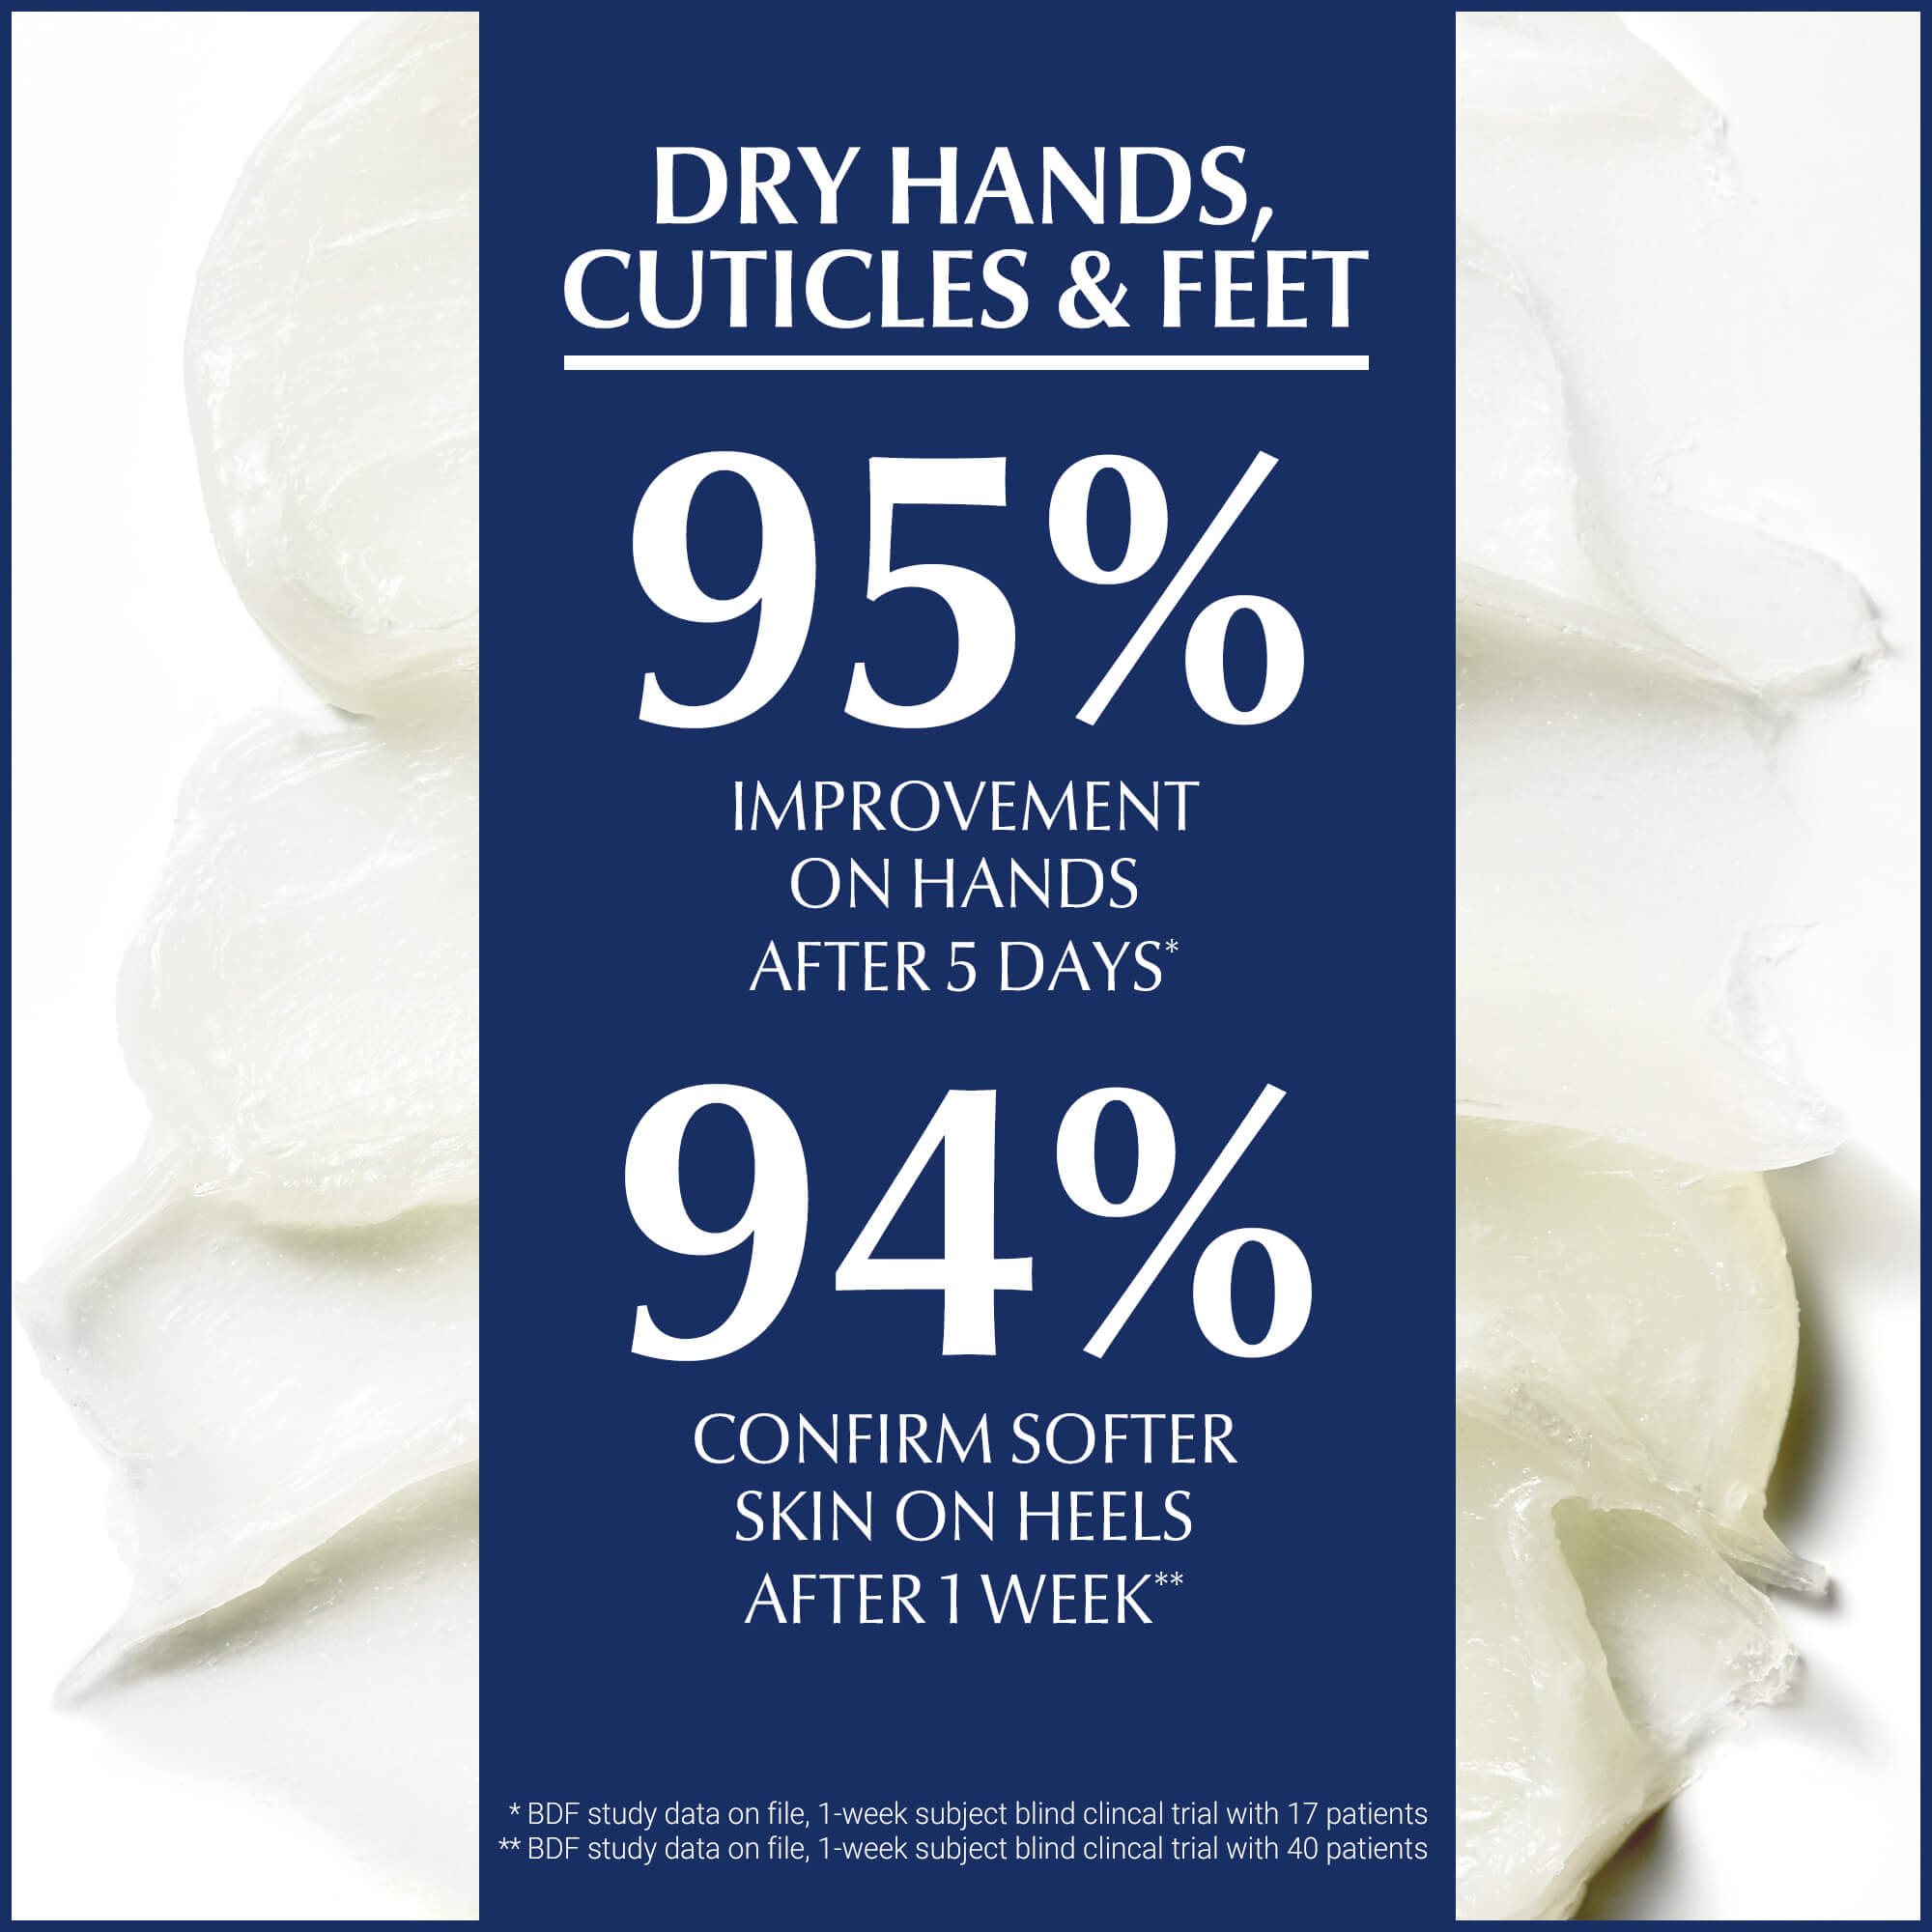 Image that reads “Dry hands, cuticles and feet –95% improvement on hands after 5 days”, “94% confirm softer skin on heels after 1 week”Imagethat reads “Dry hands, cuticles and feet –95% improvement on hands after 5 days”, “94% confirm softer skin on heels after 1 week”